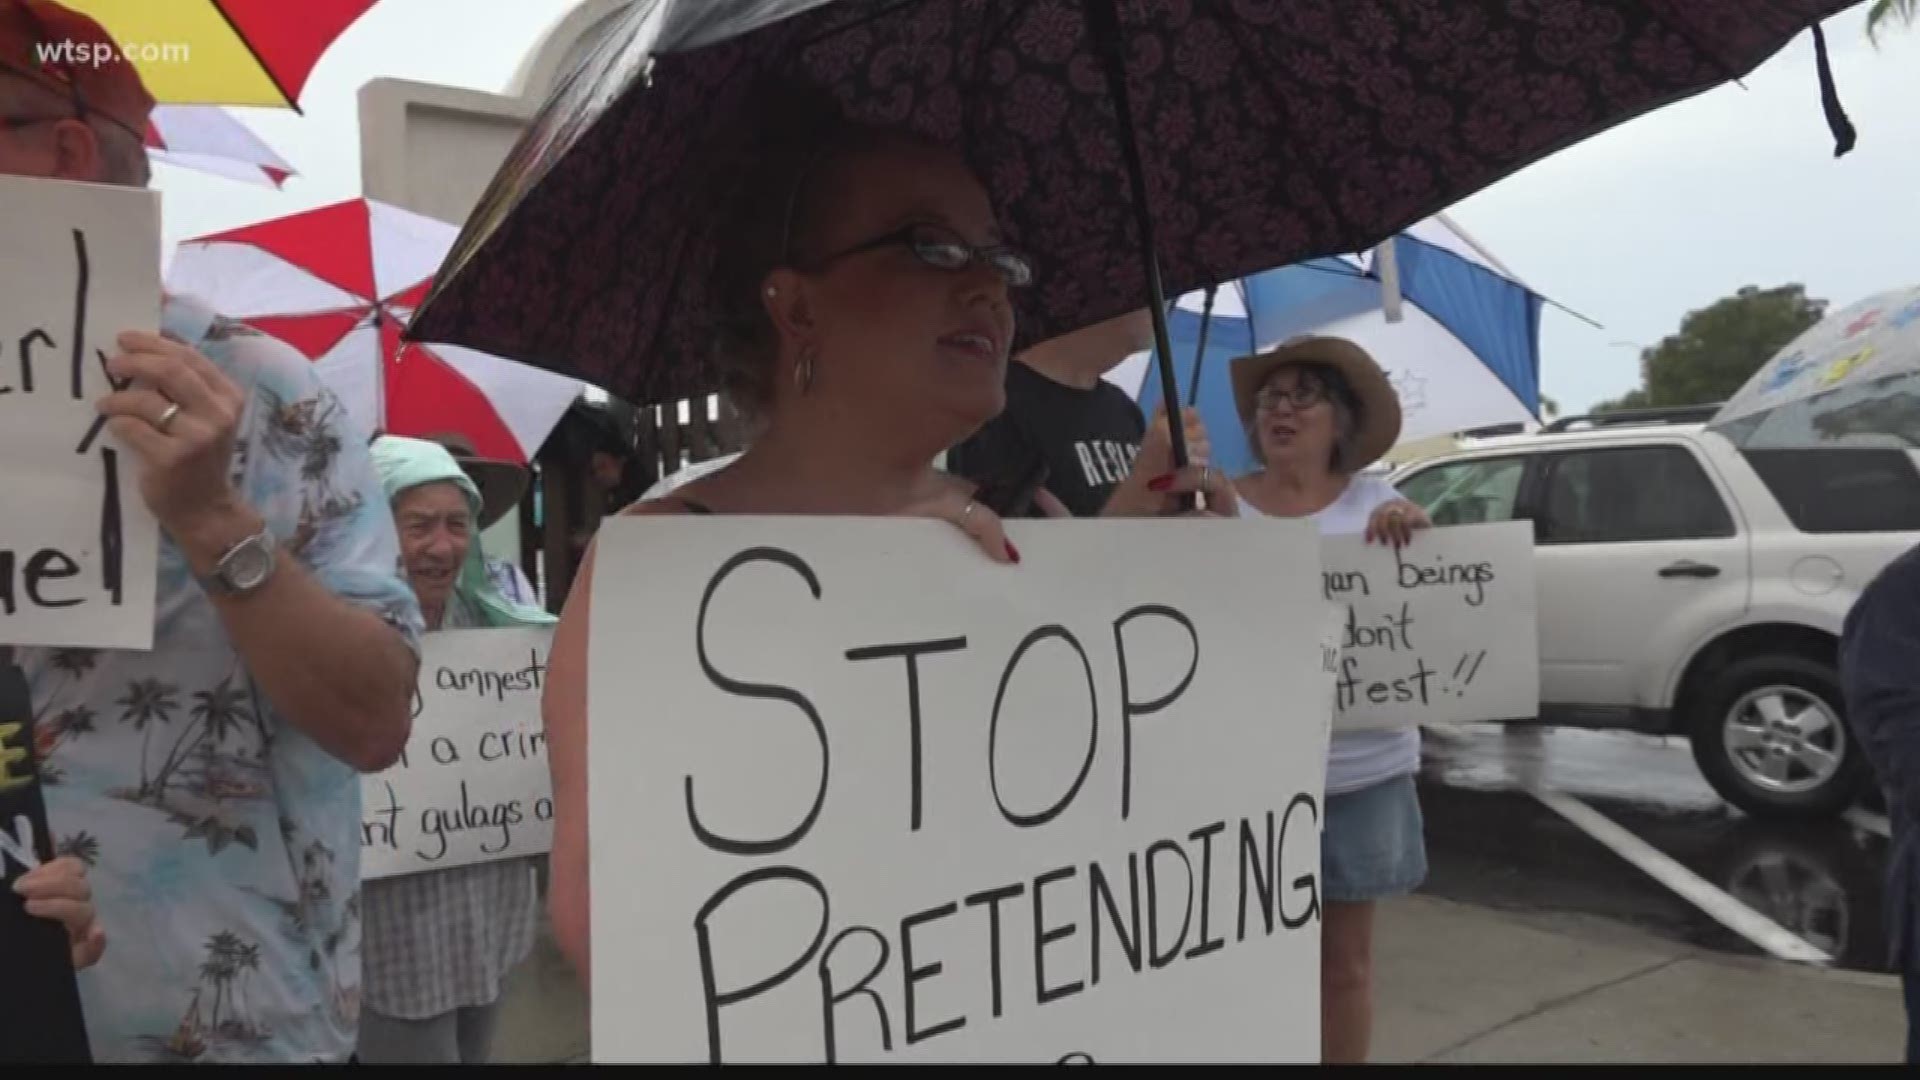 "Families Belong Together" rallies took part across the country today, including here in Tampa Bay.